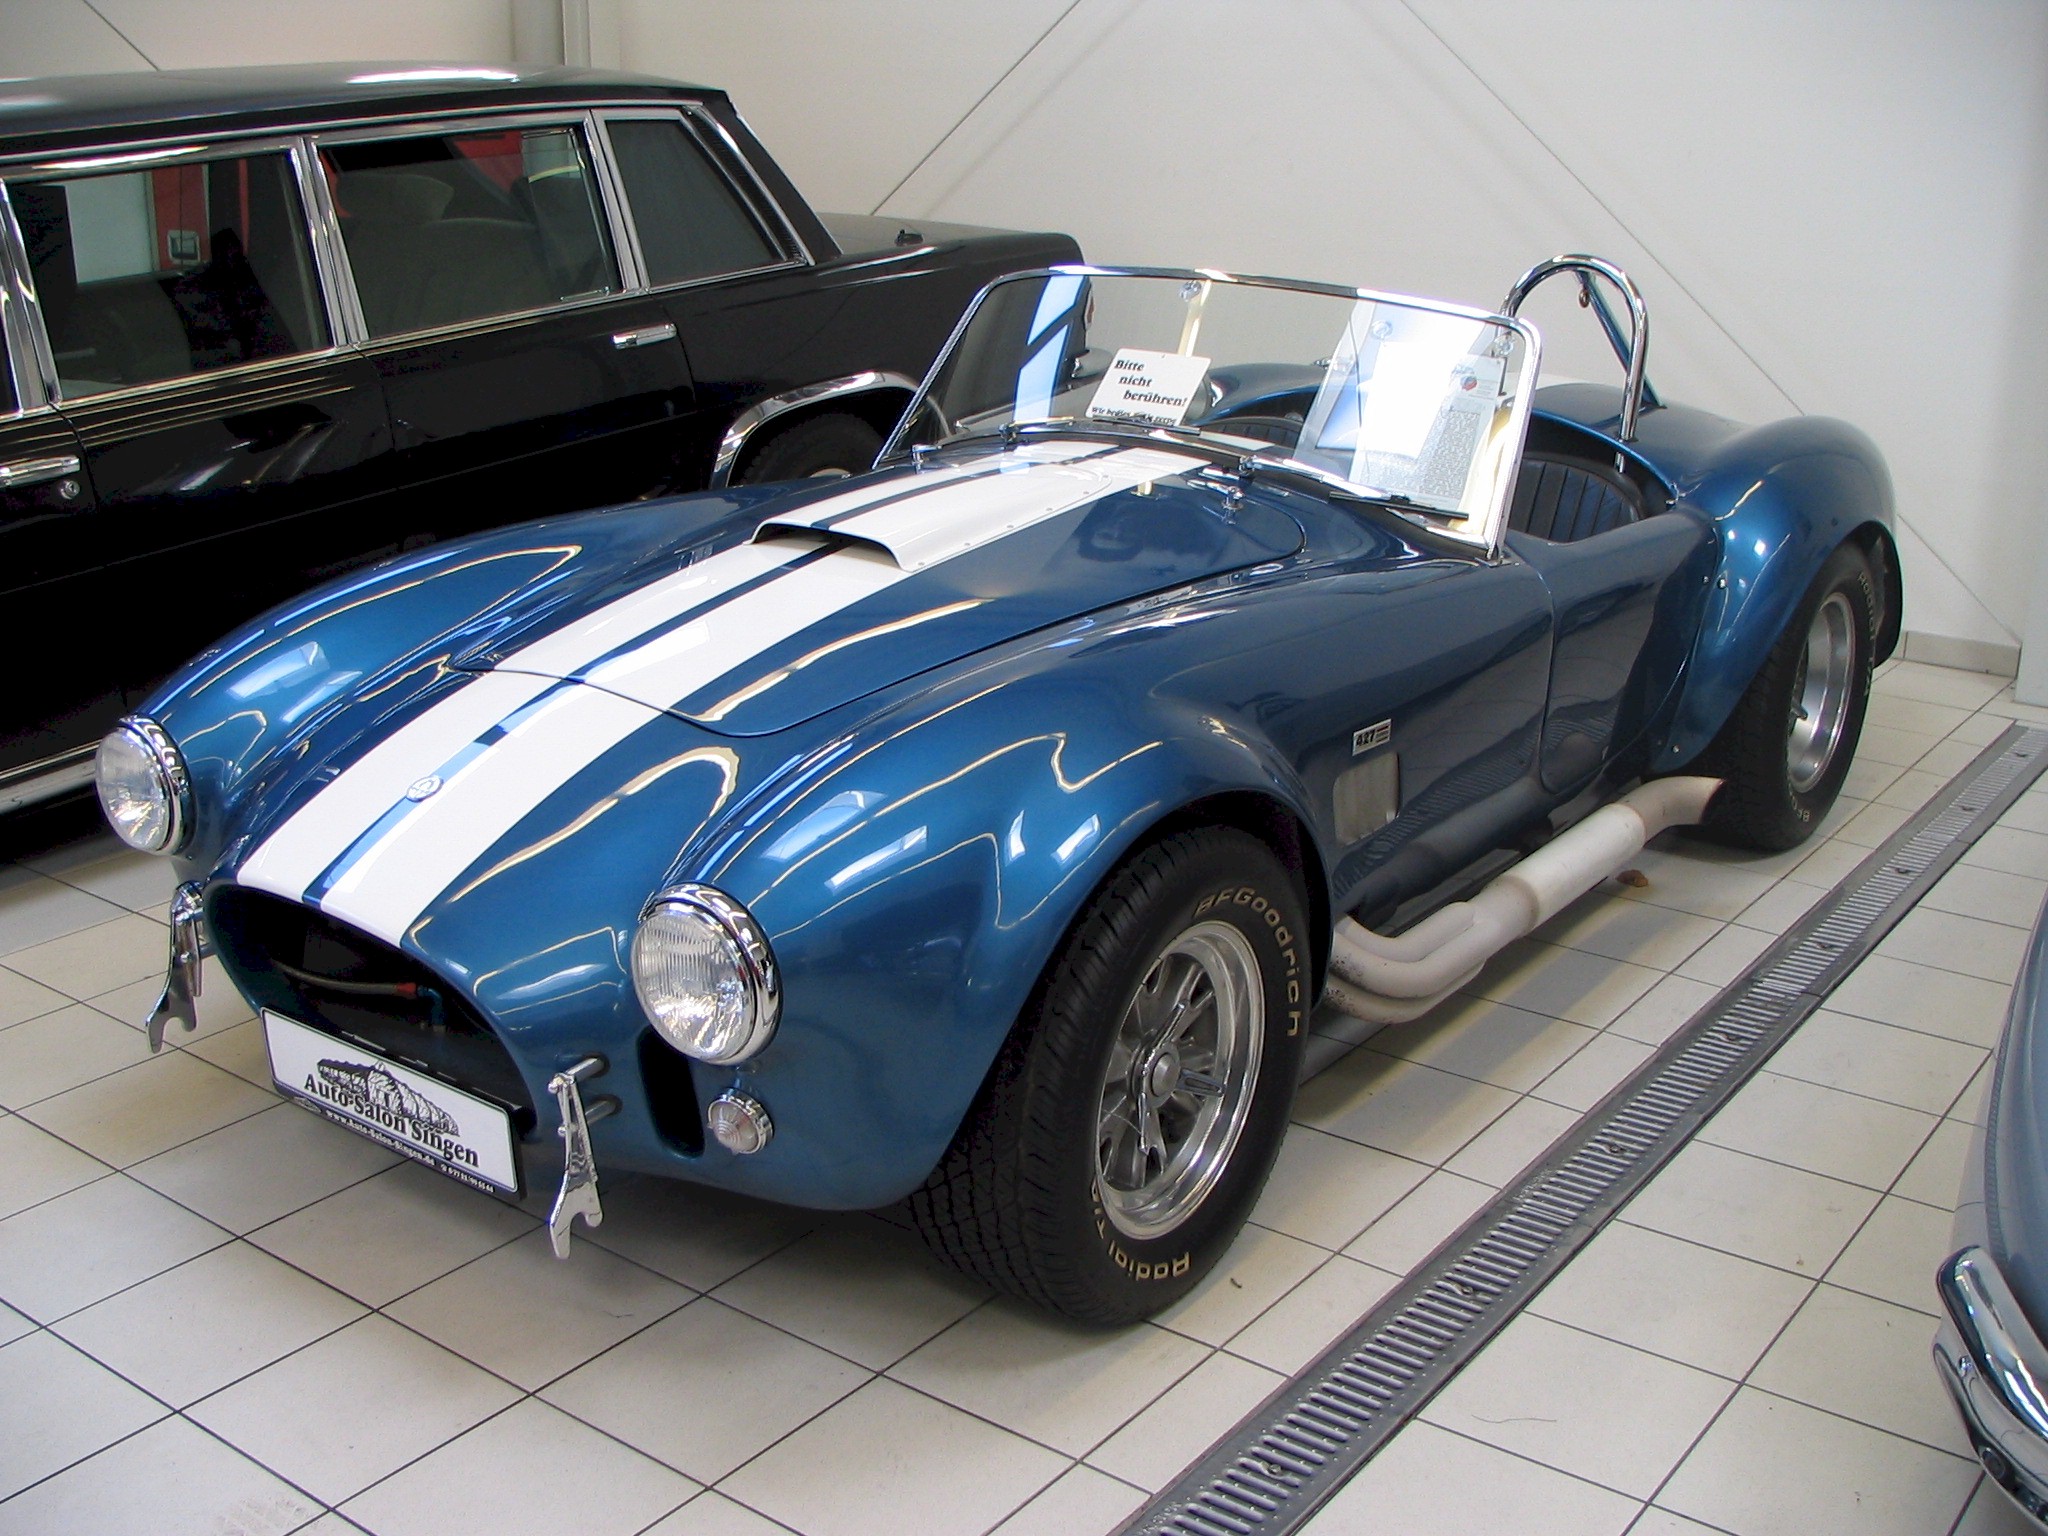 Mad 4 Wheels - 1964 Shelby Cobra 427 - Best quality free high ...